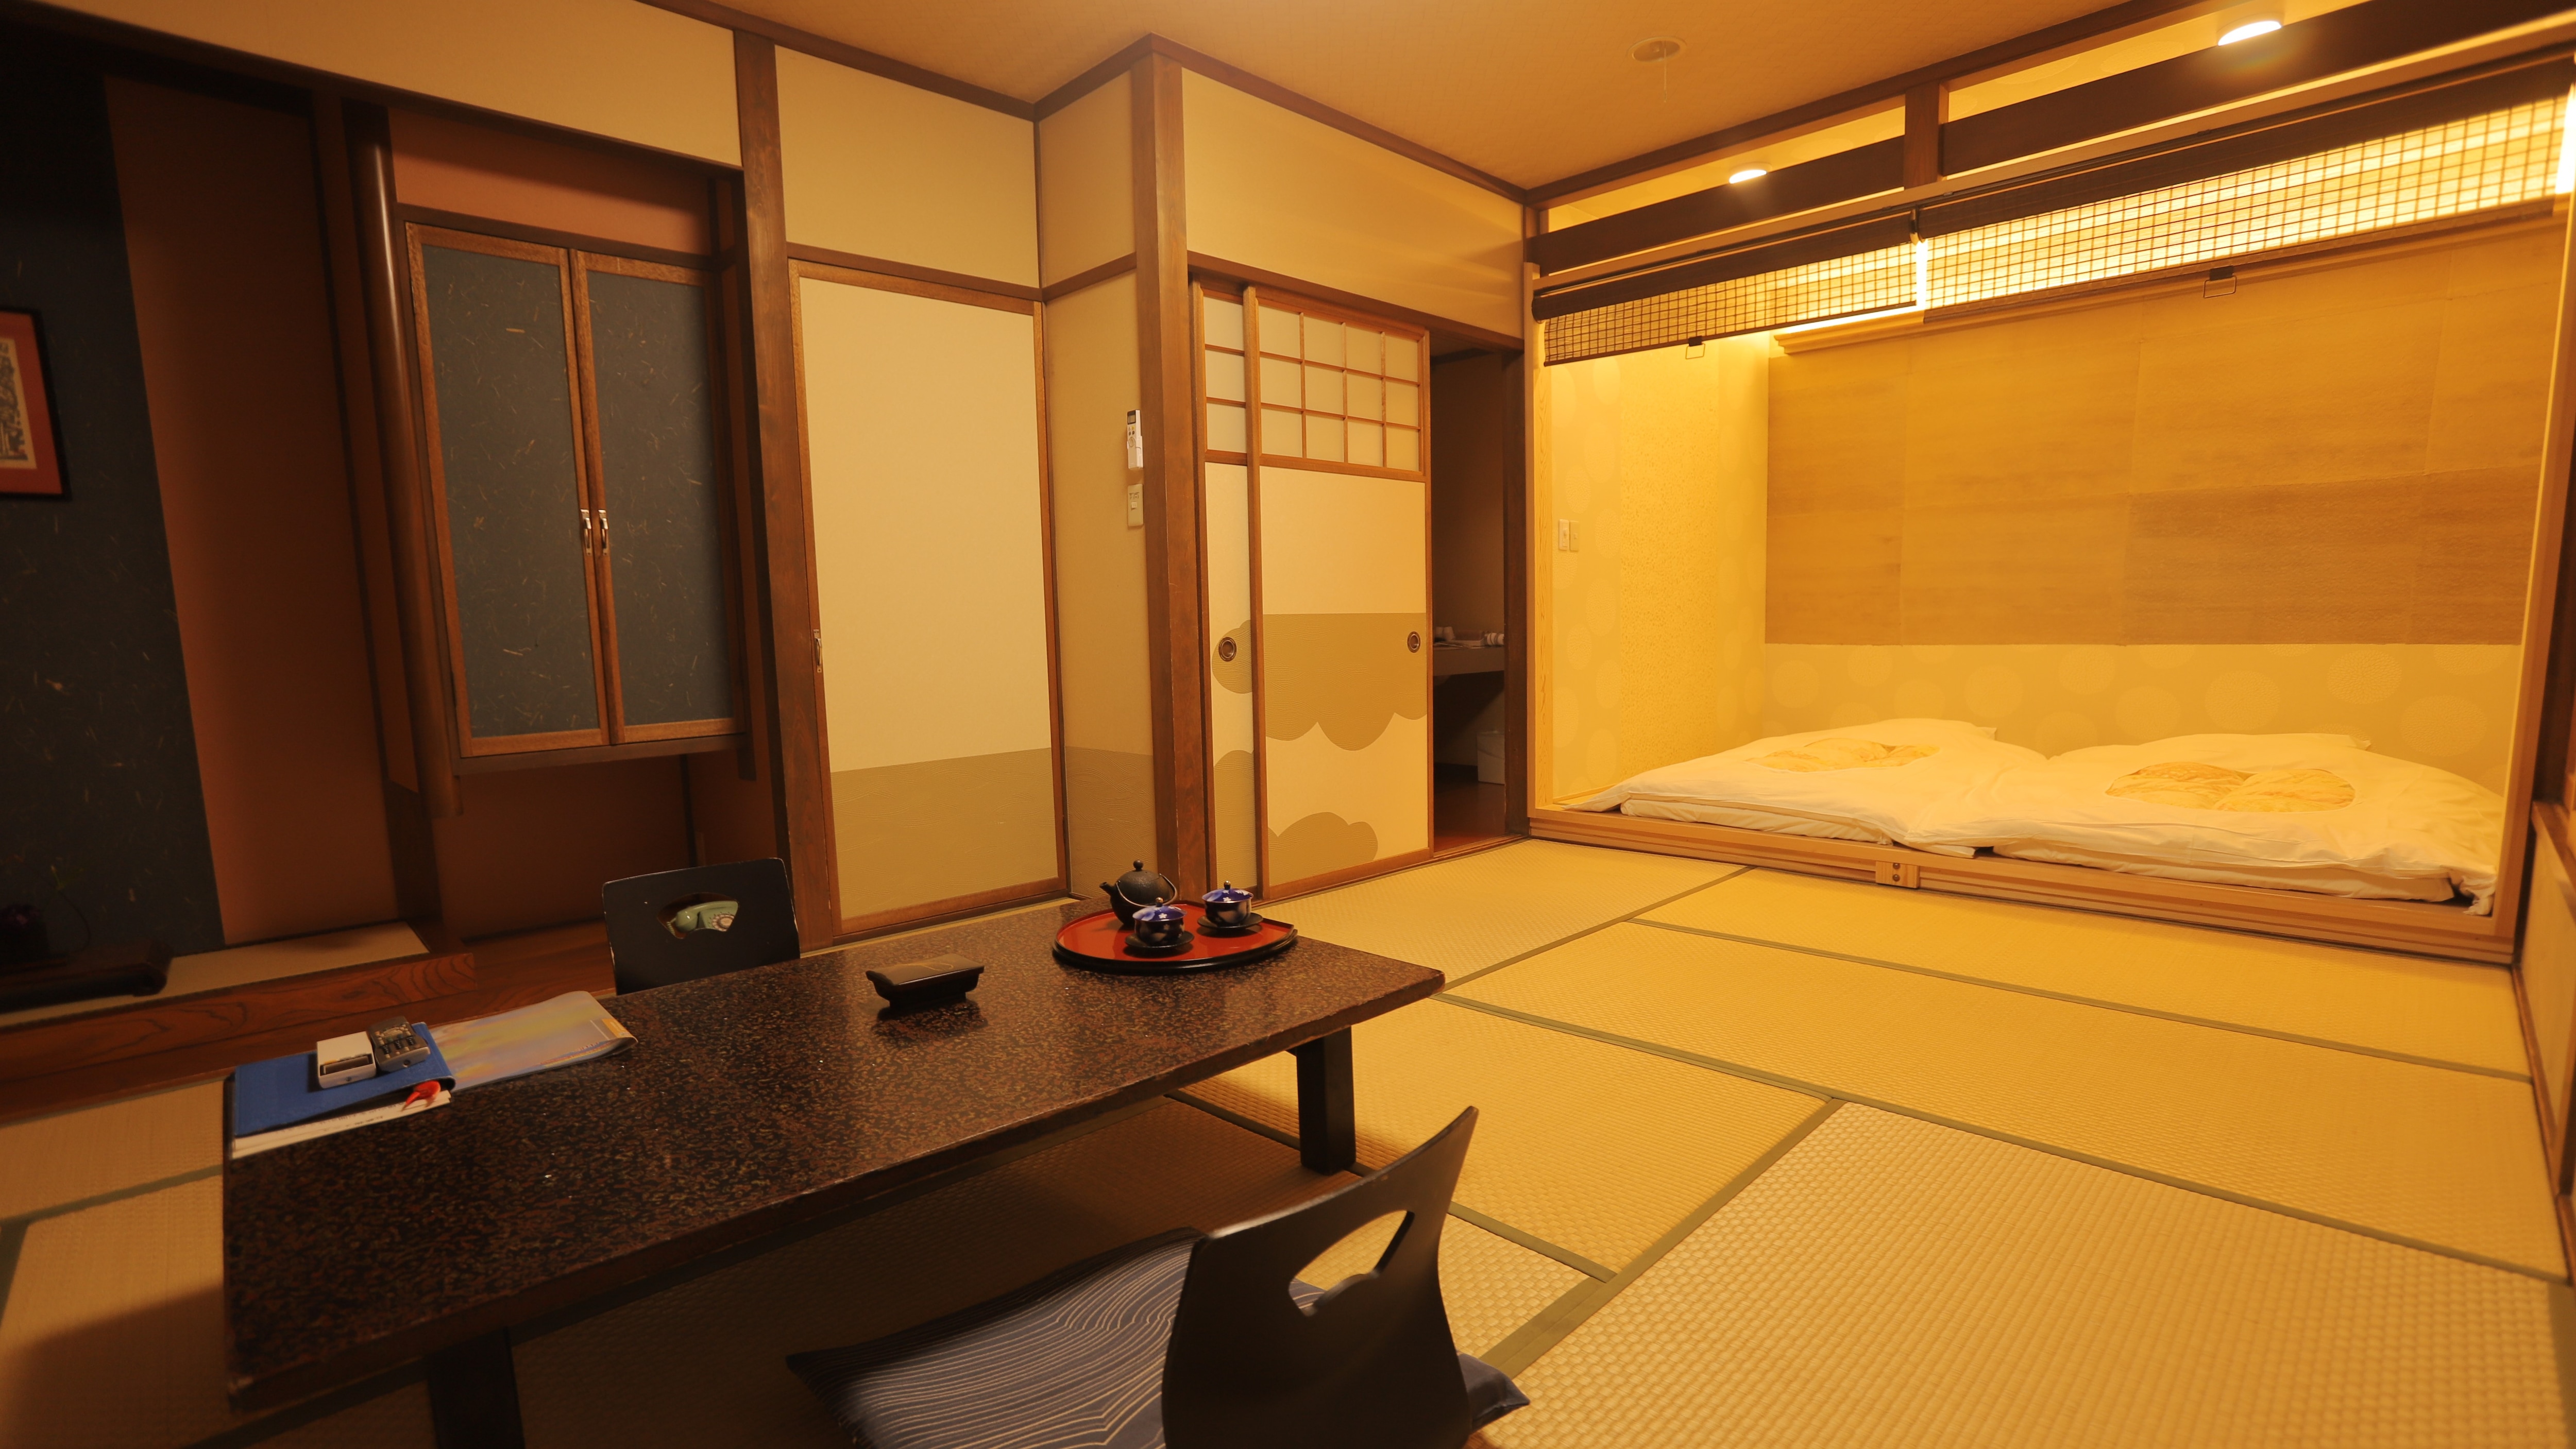 An example of a 10 tatami Japanese-style room